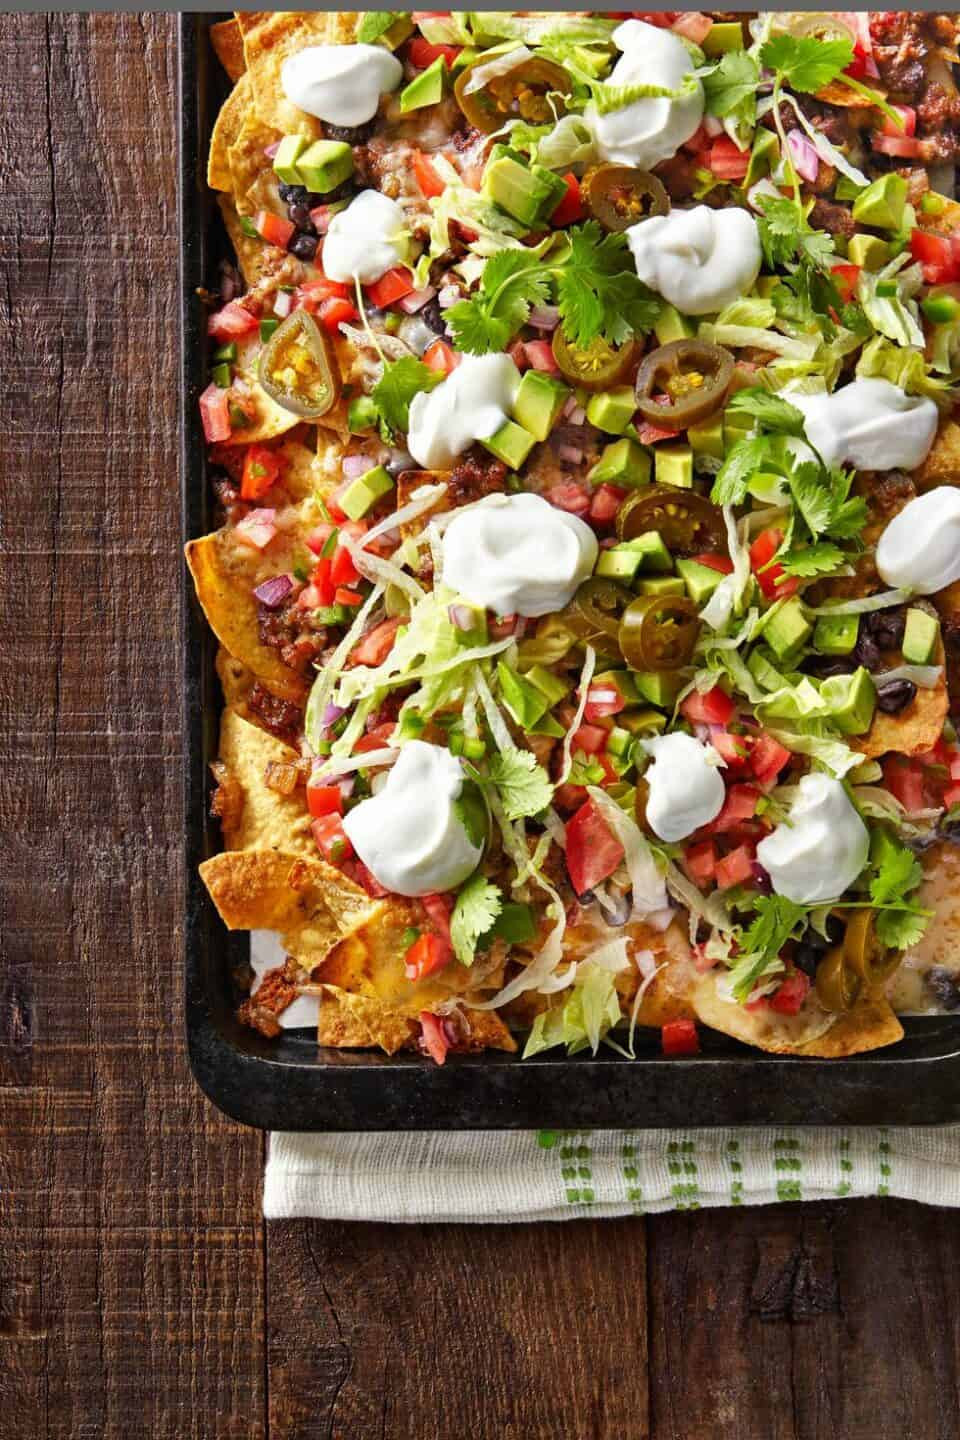 Super Bowl Sunday Recipes
 25 Super Bowl Recipes to Make on Sunday An Unblurred Lady